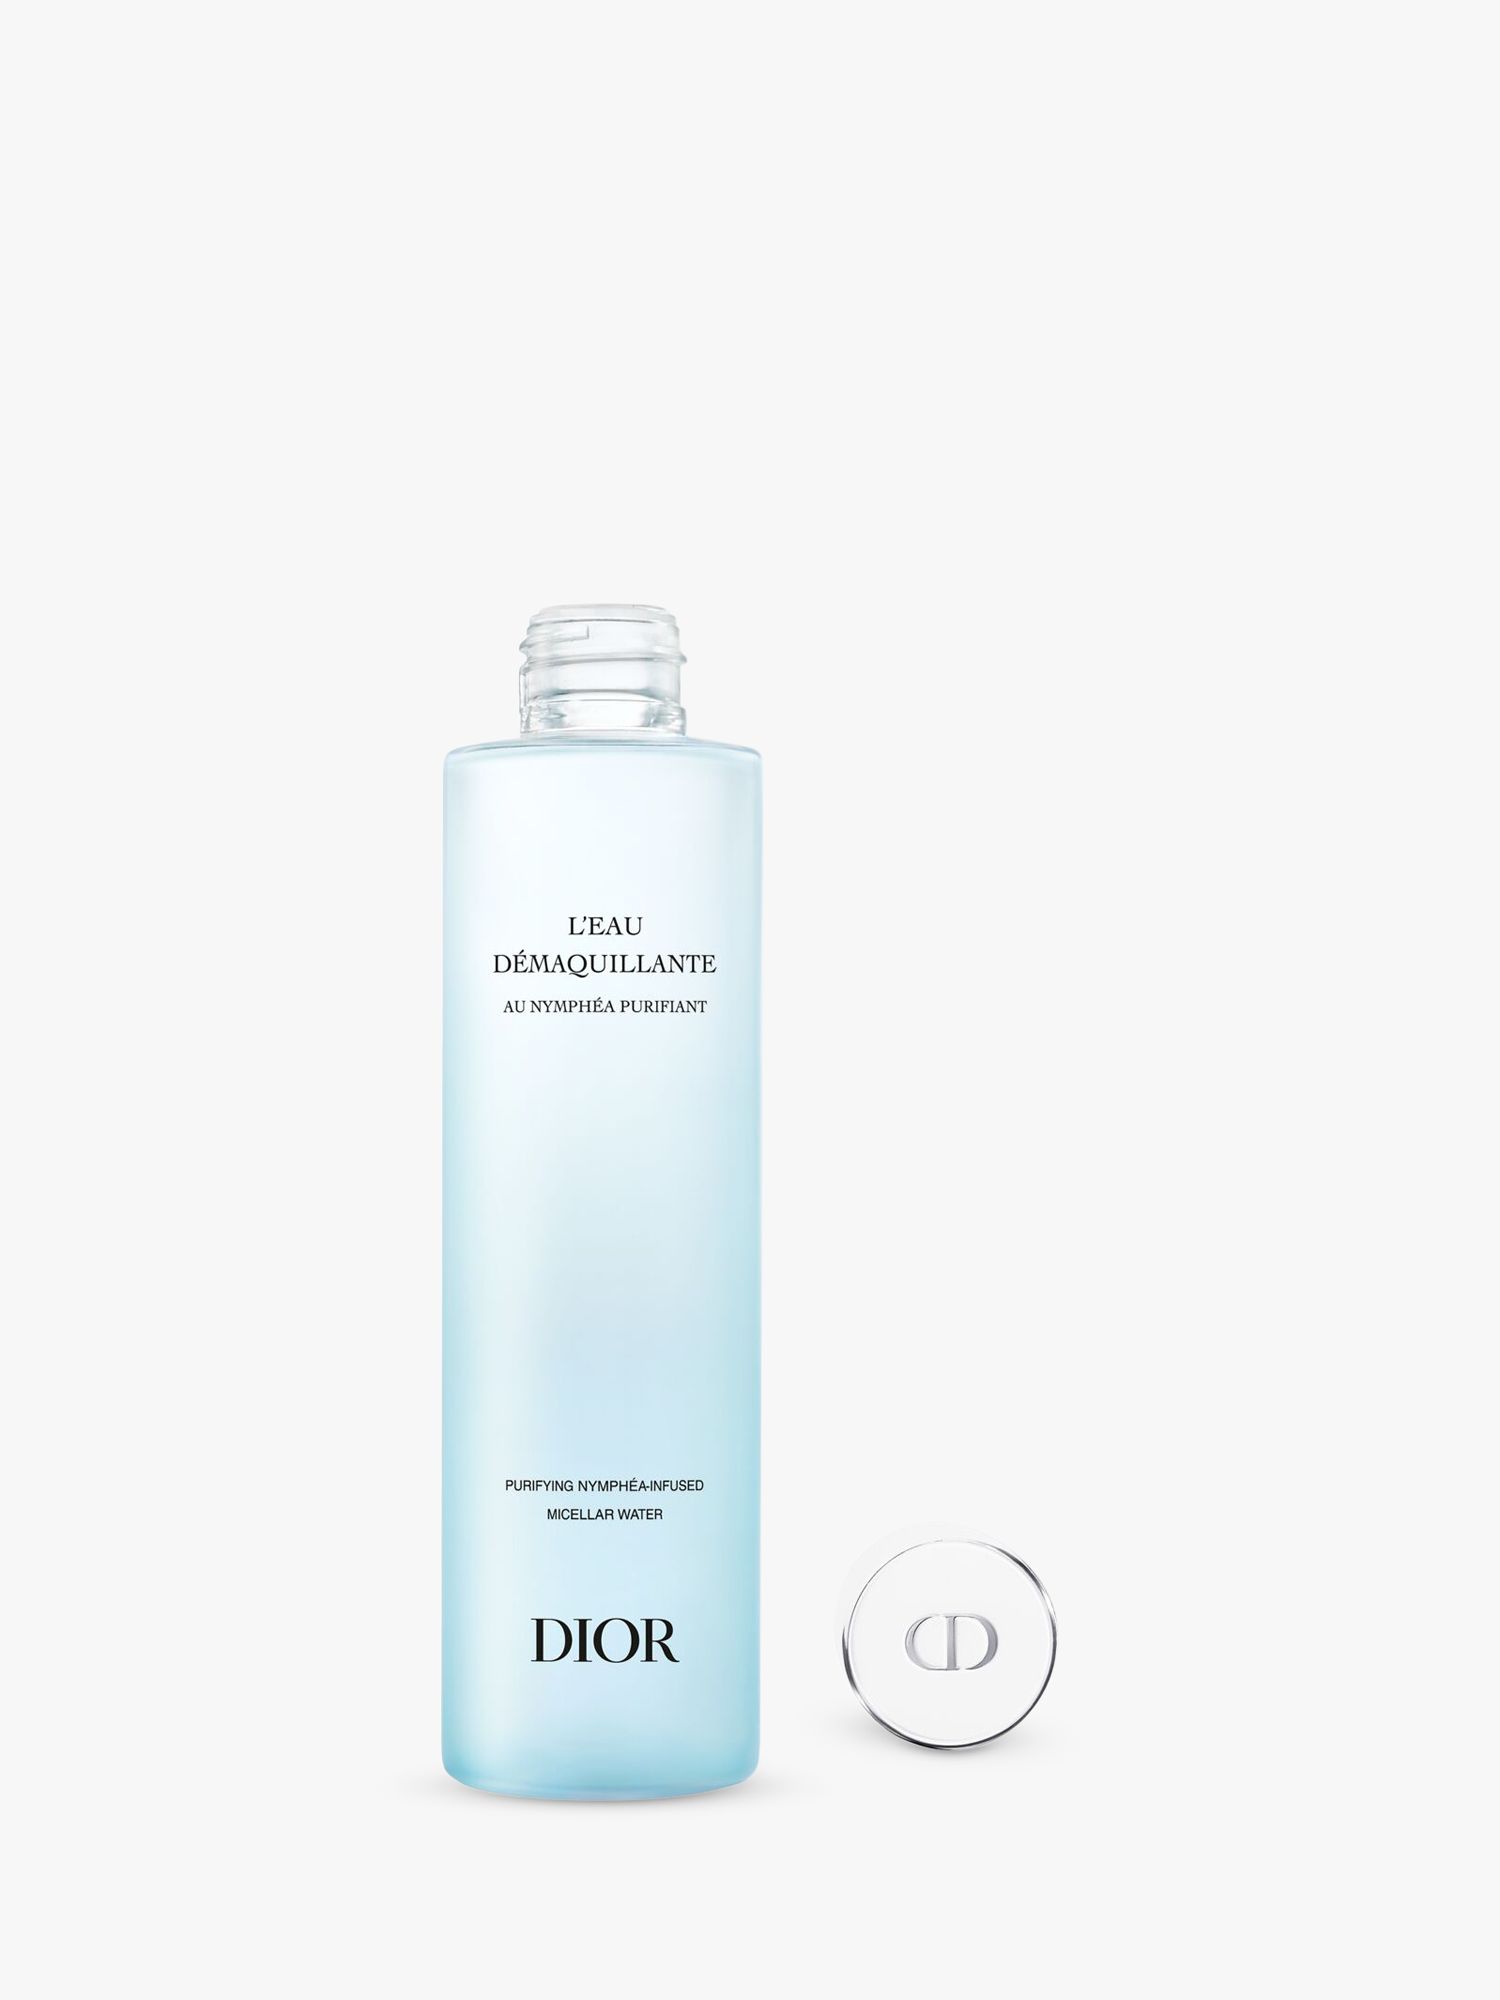 DIOR Purifying Nymphéa Infused Micellar Water, 200ml 2